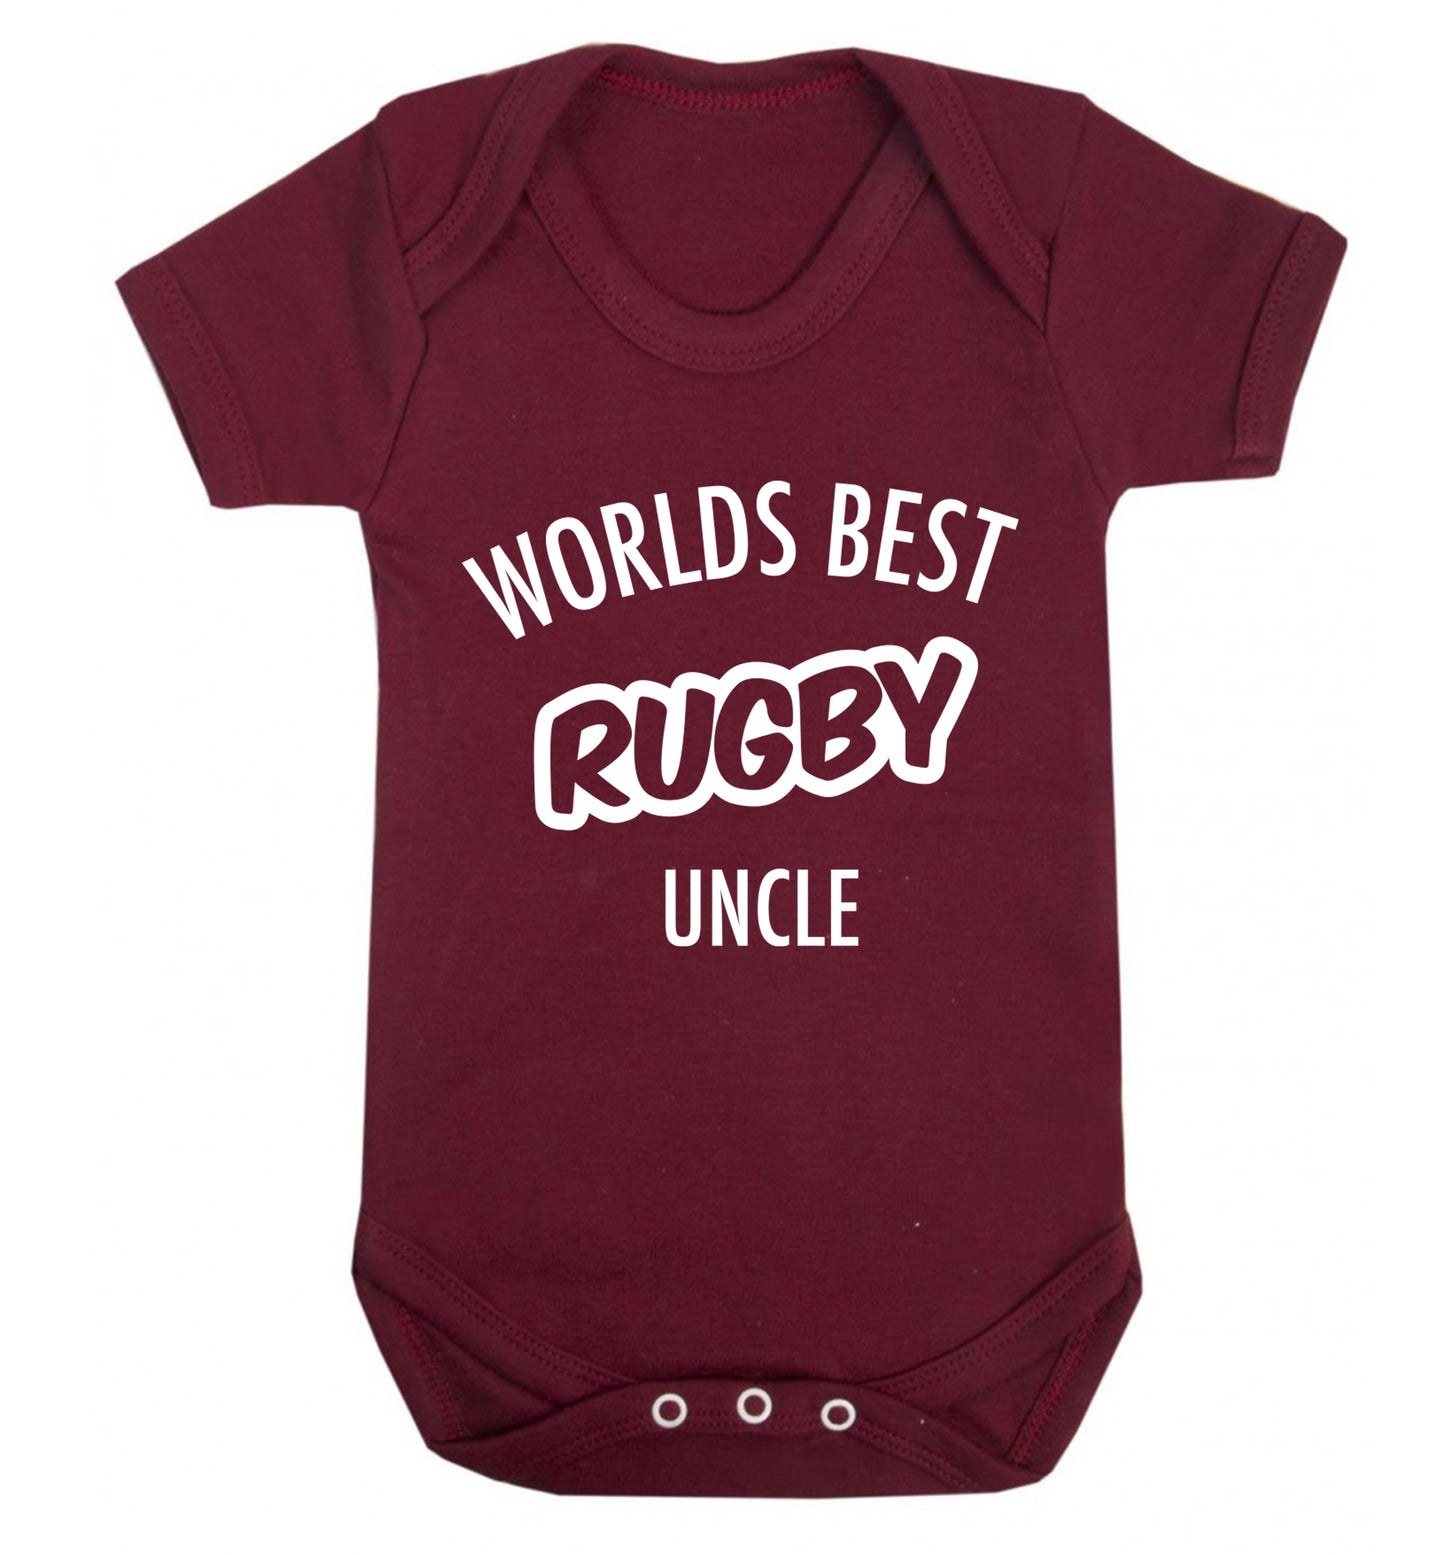 Worlds best rugby uncle Baby Vest maroon 18-24 months